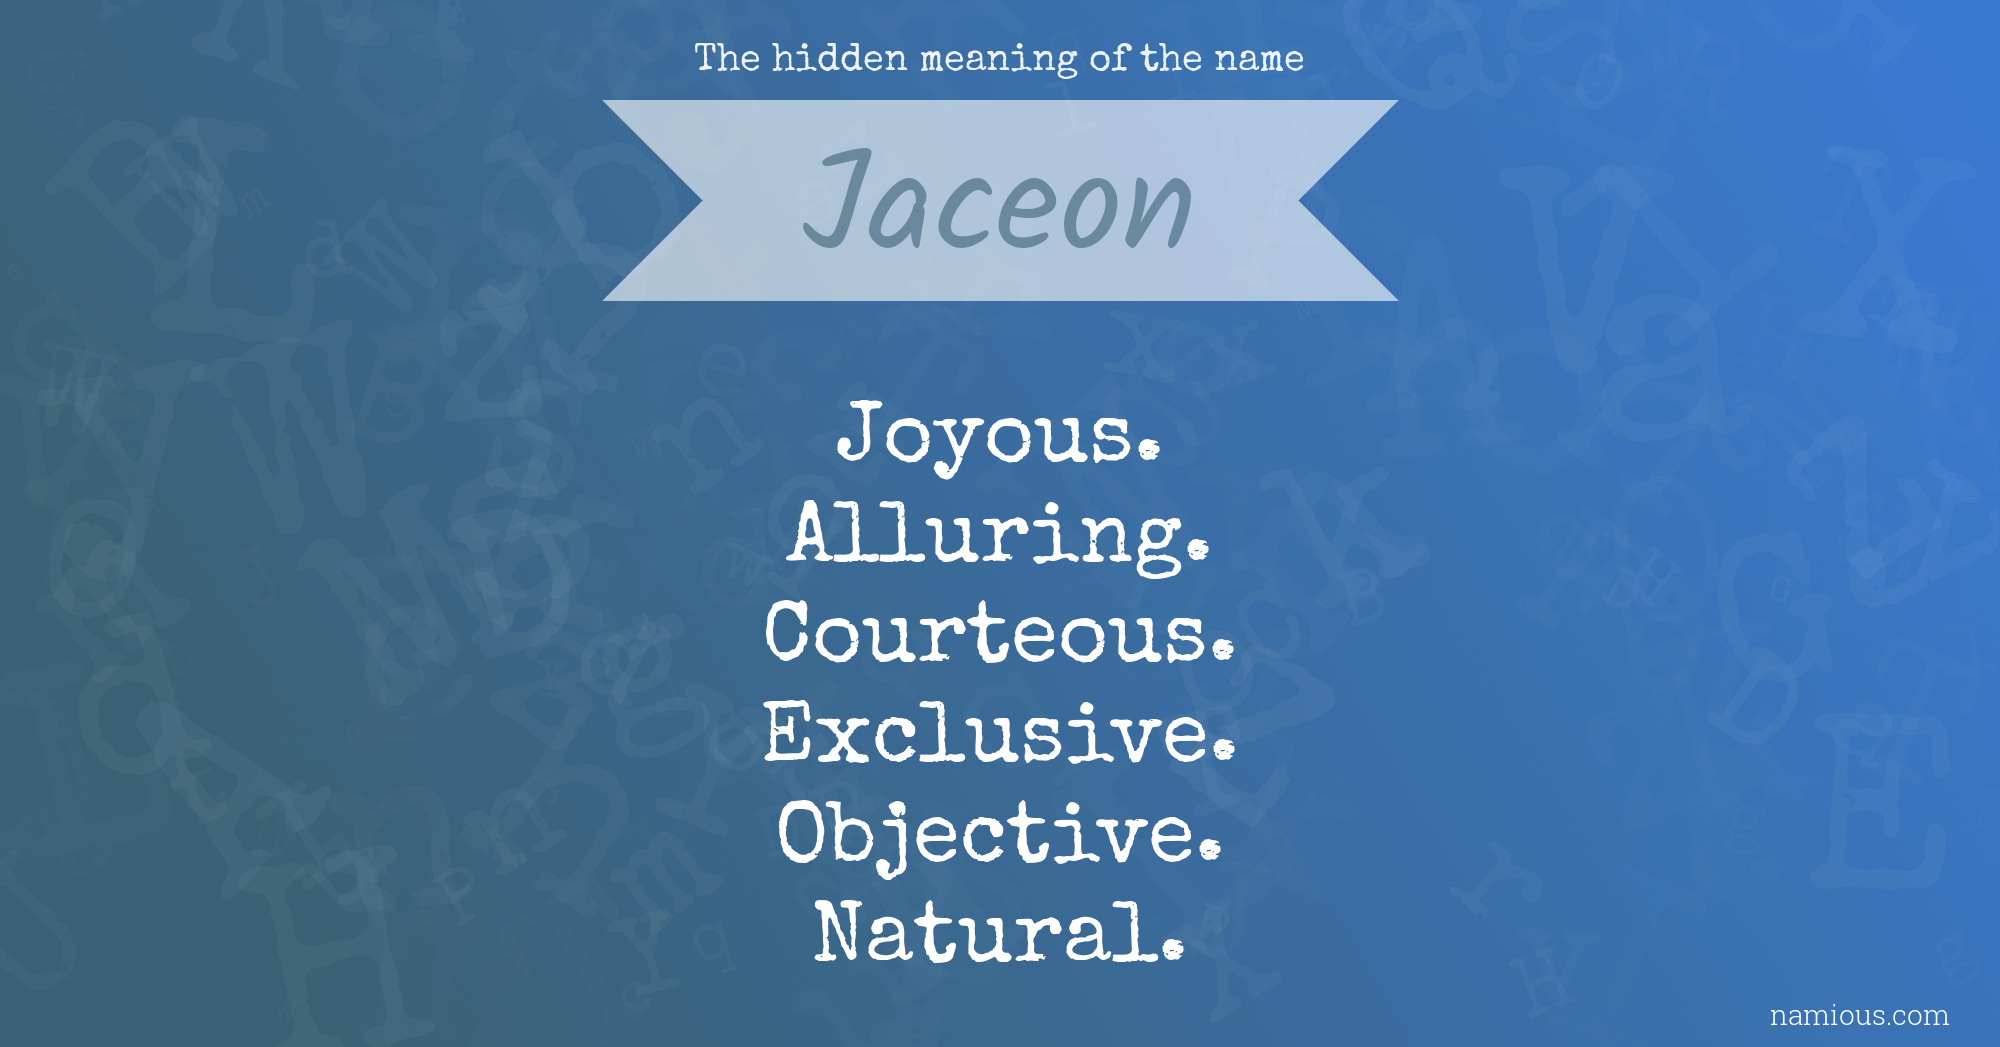 The hidden meaning of the name Jaceon